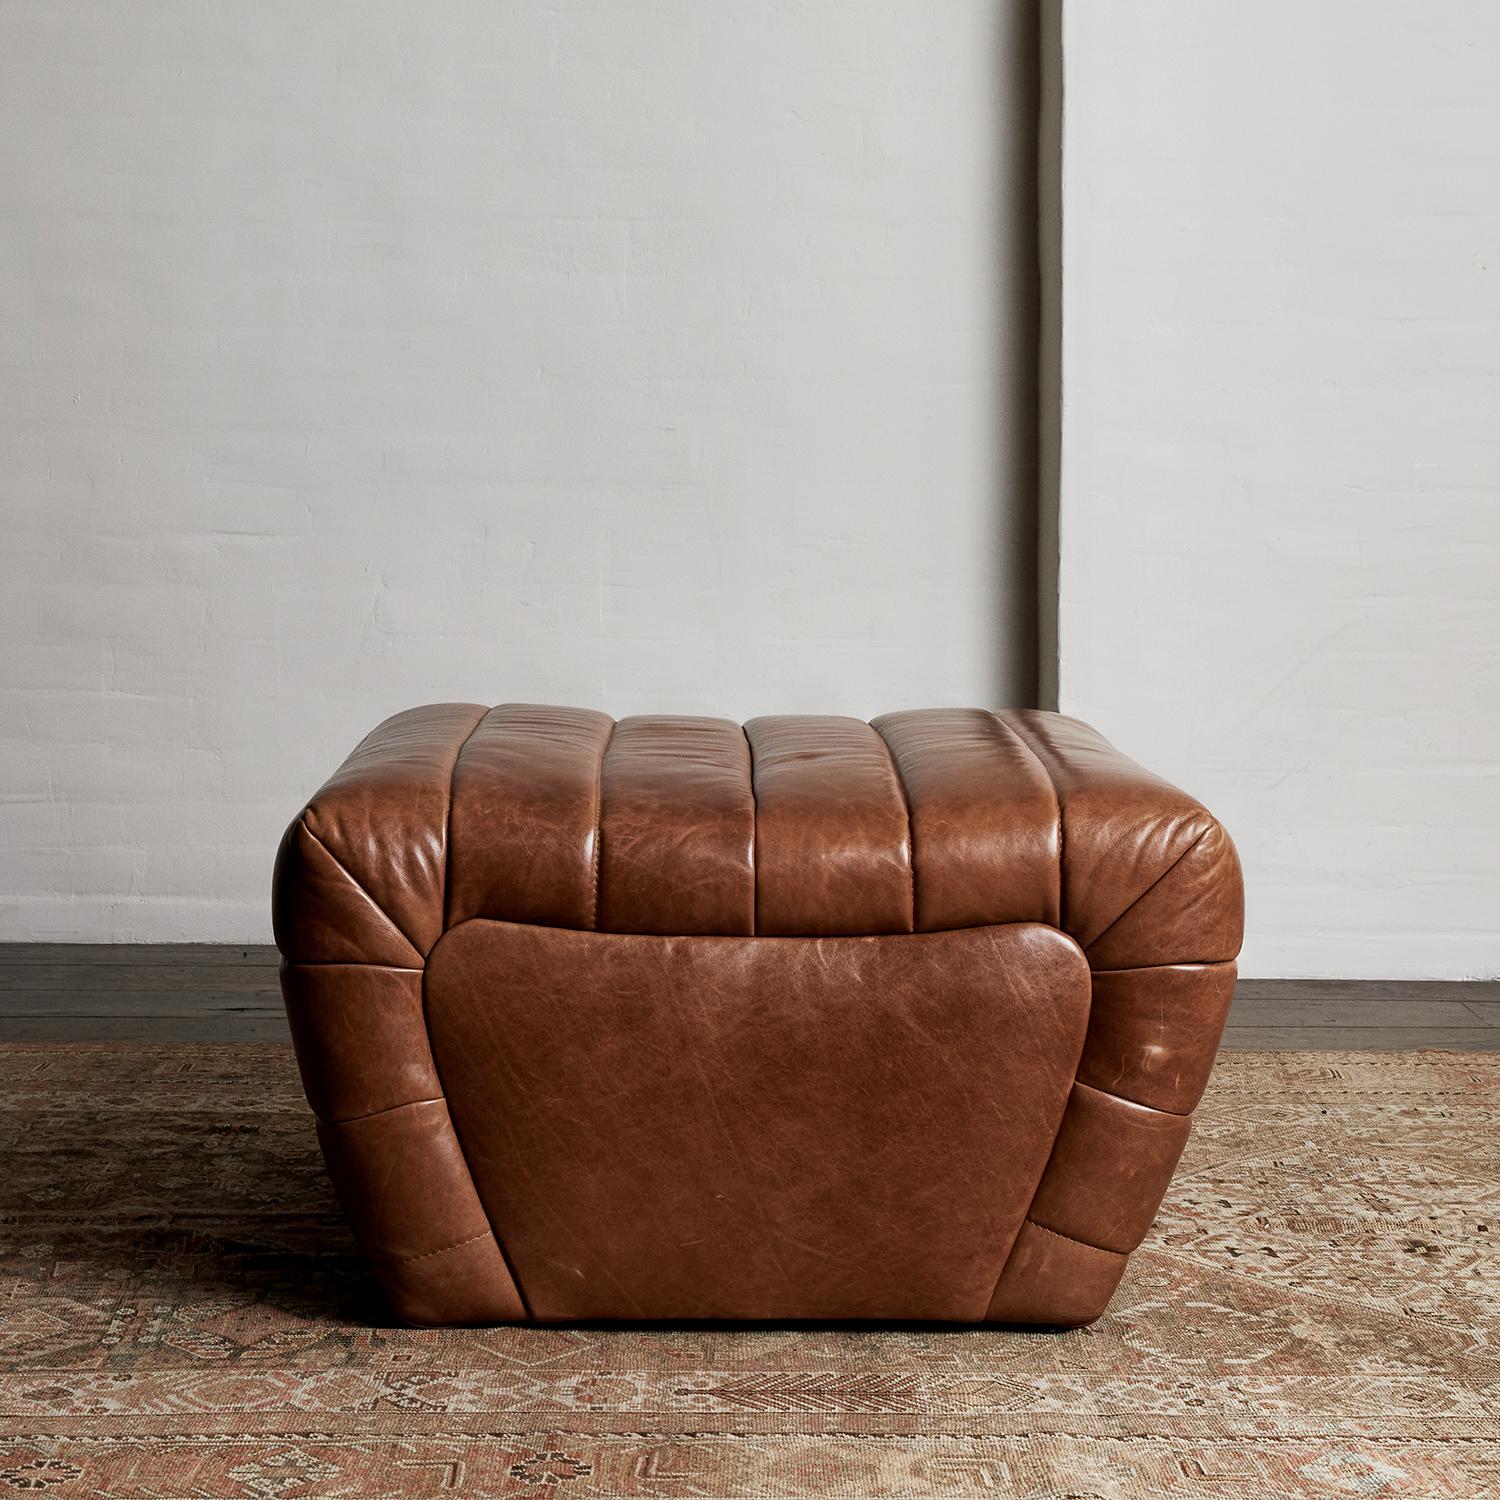 Brunoy Leather Ottoman by Christiane Lemieux In New Condition For Sale In New York, NY